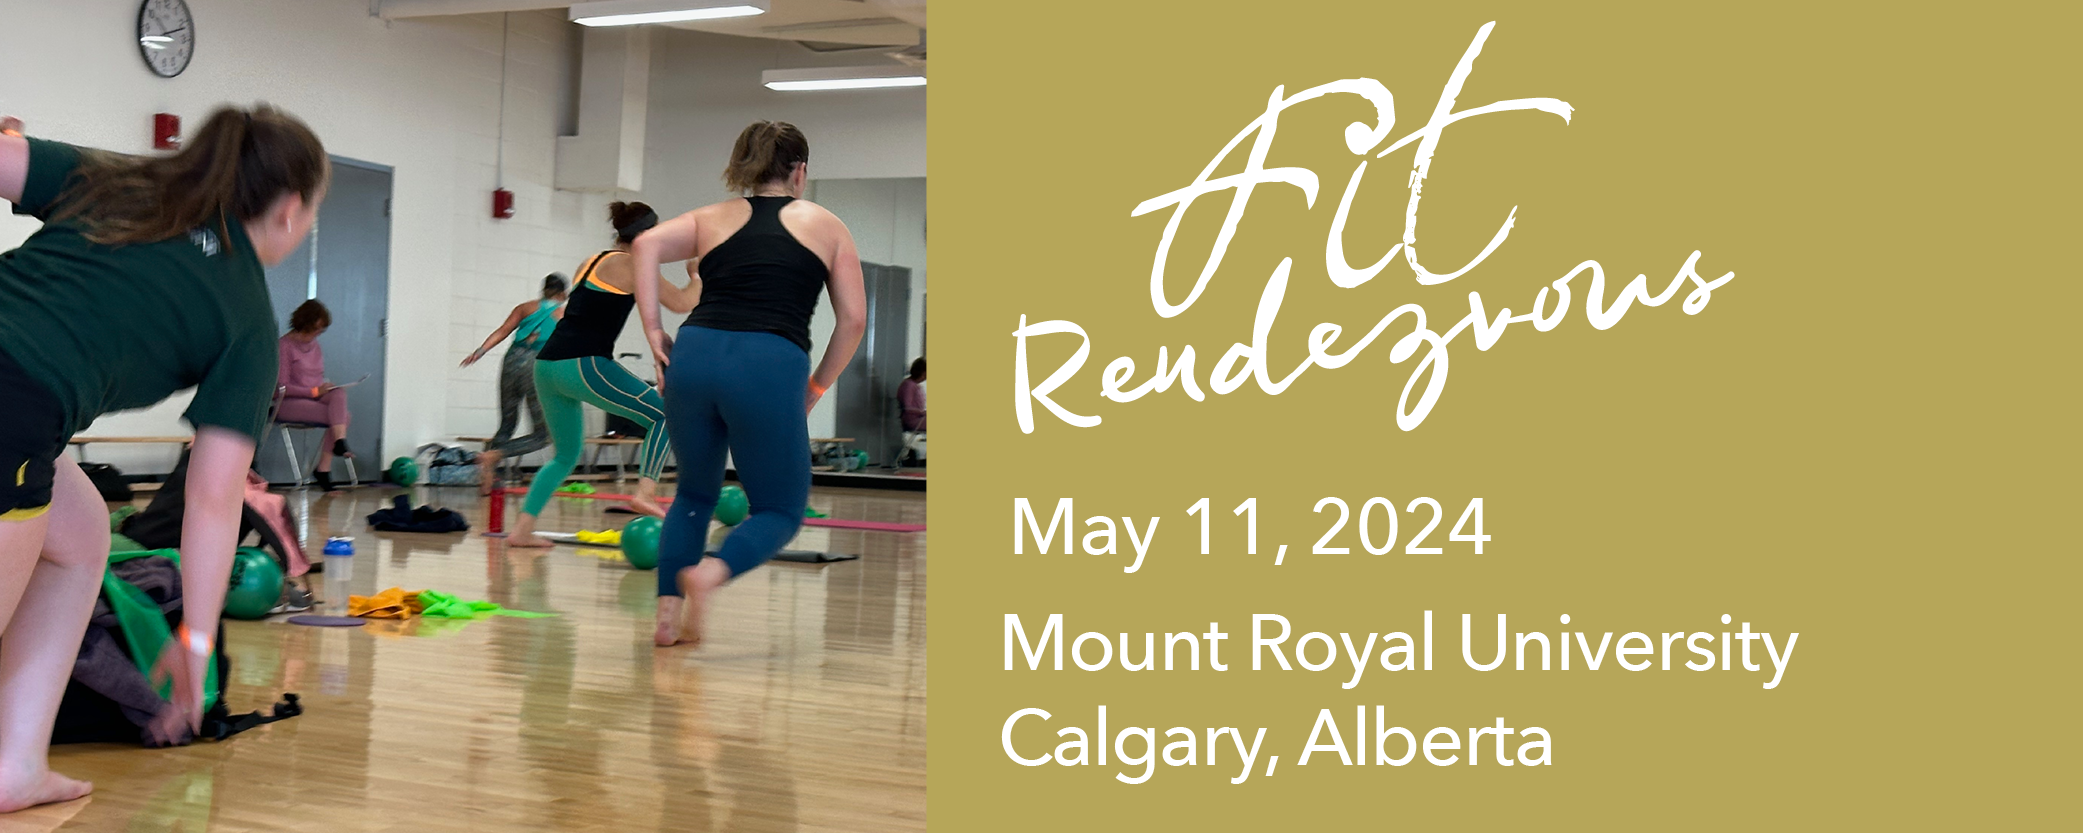 Fit Rendezvous announcement, May 11, 2024 Mount Royal University, Calgary